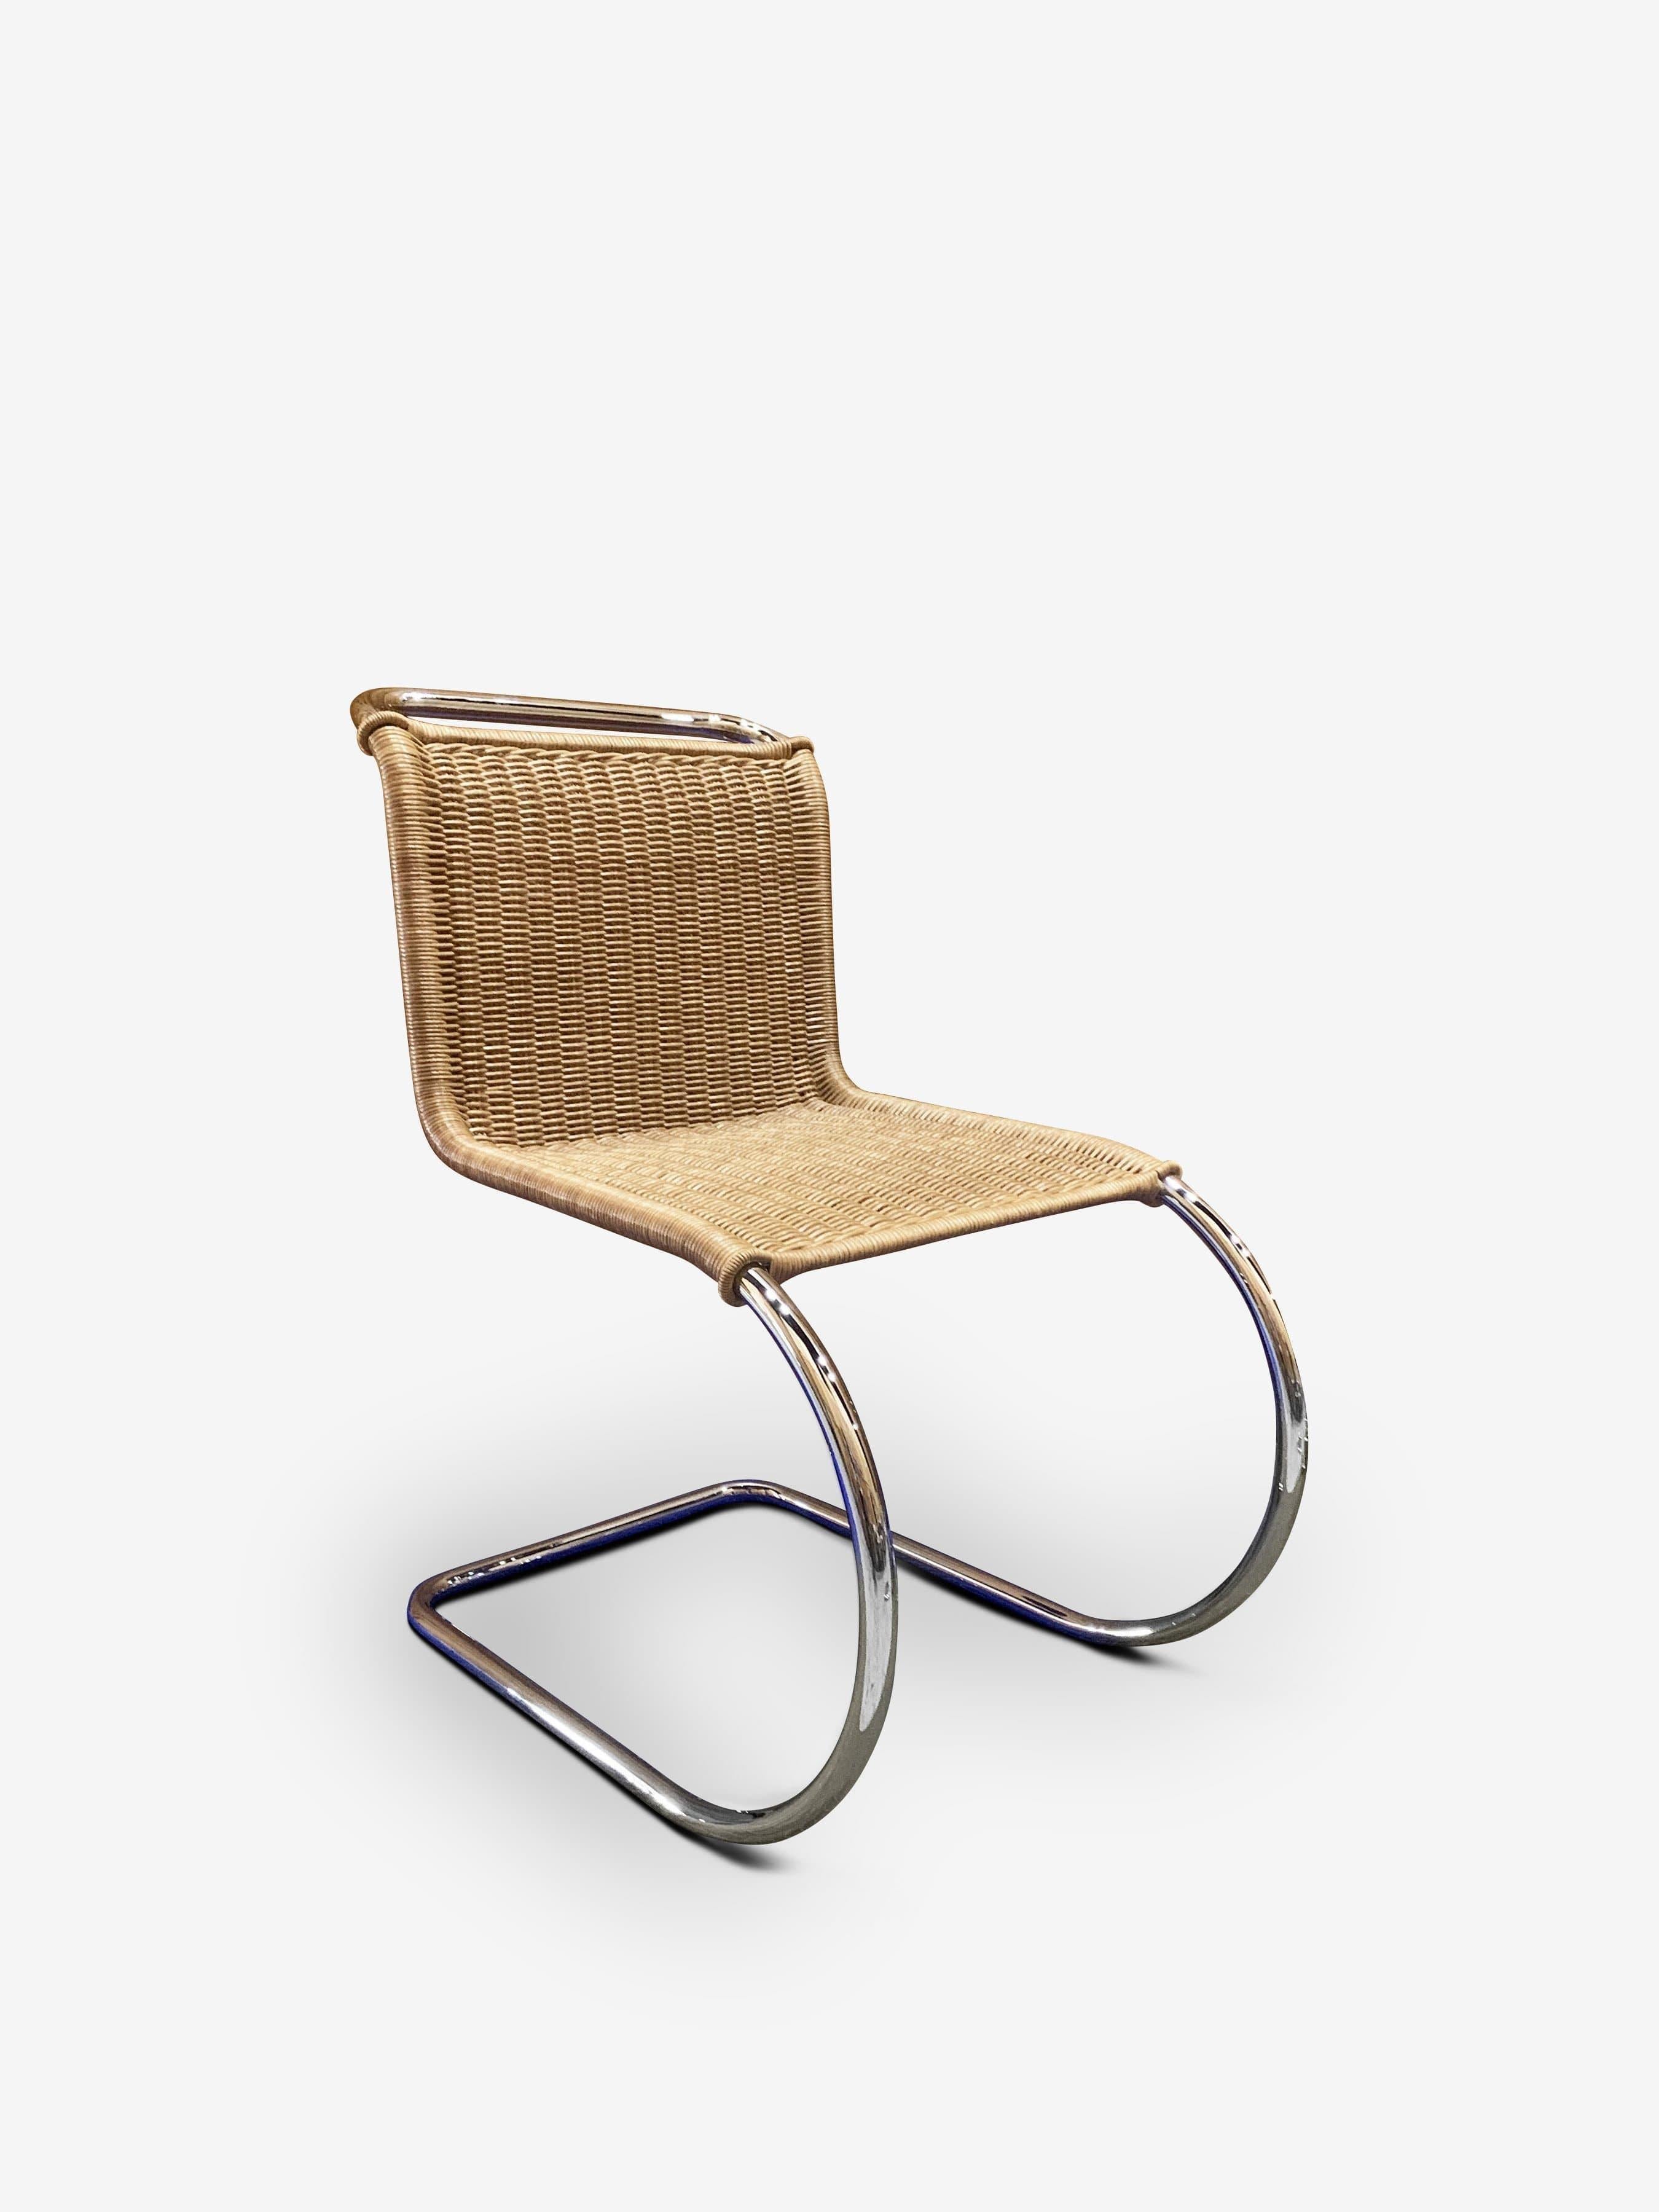 Mies van der Rohe MR Rattan Armless Side Chair by Knoll In New Condition For Sale In Sag Harbor, NY